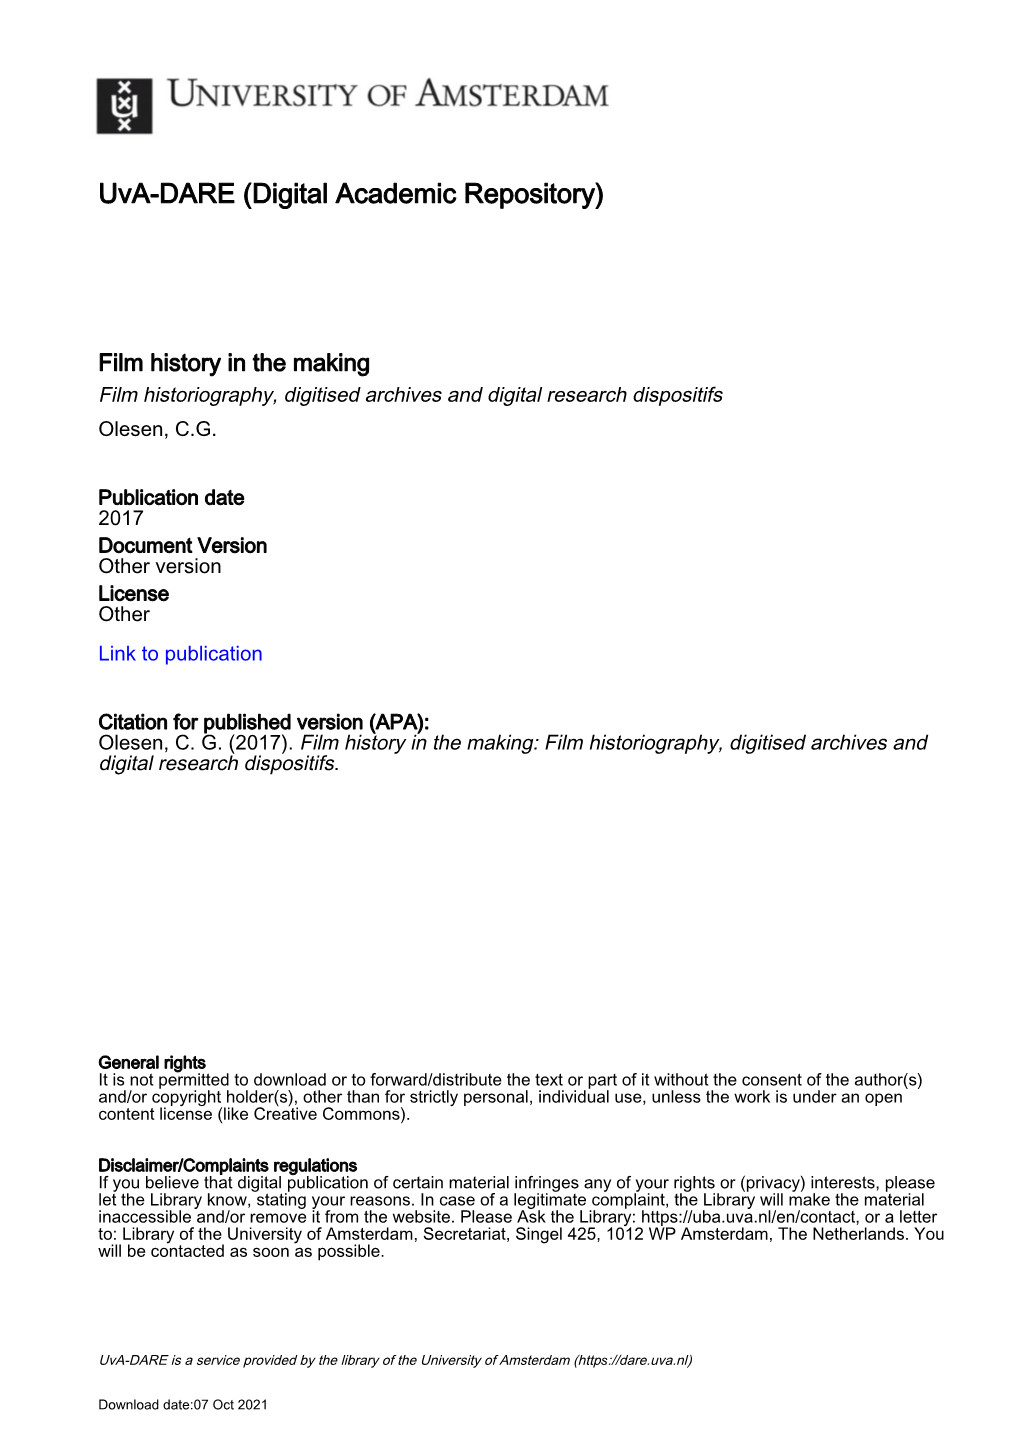 Film History in the Making Film Historiography, Digitised Archives and Digital Research Dispositifs Olesen, C.G